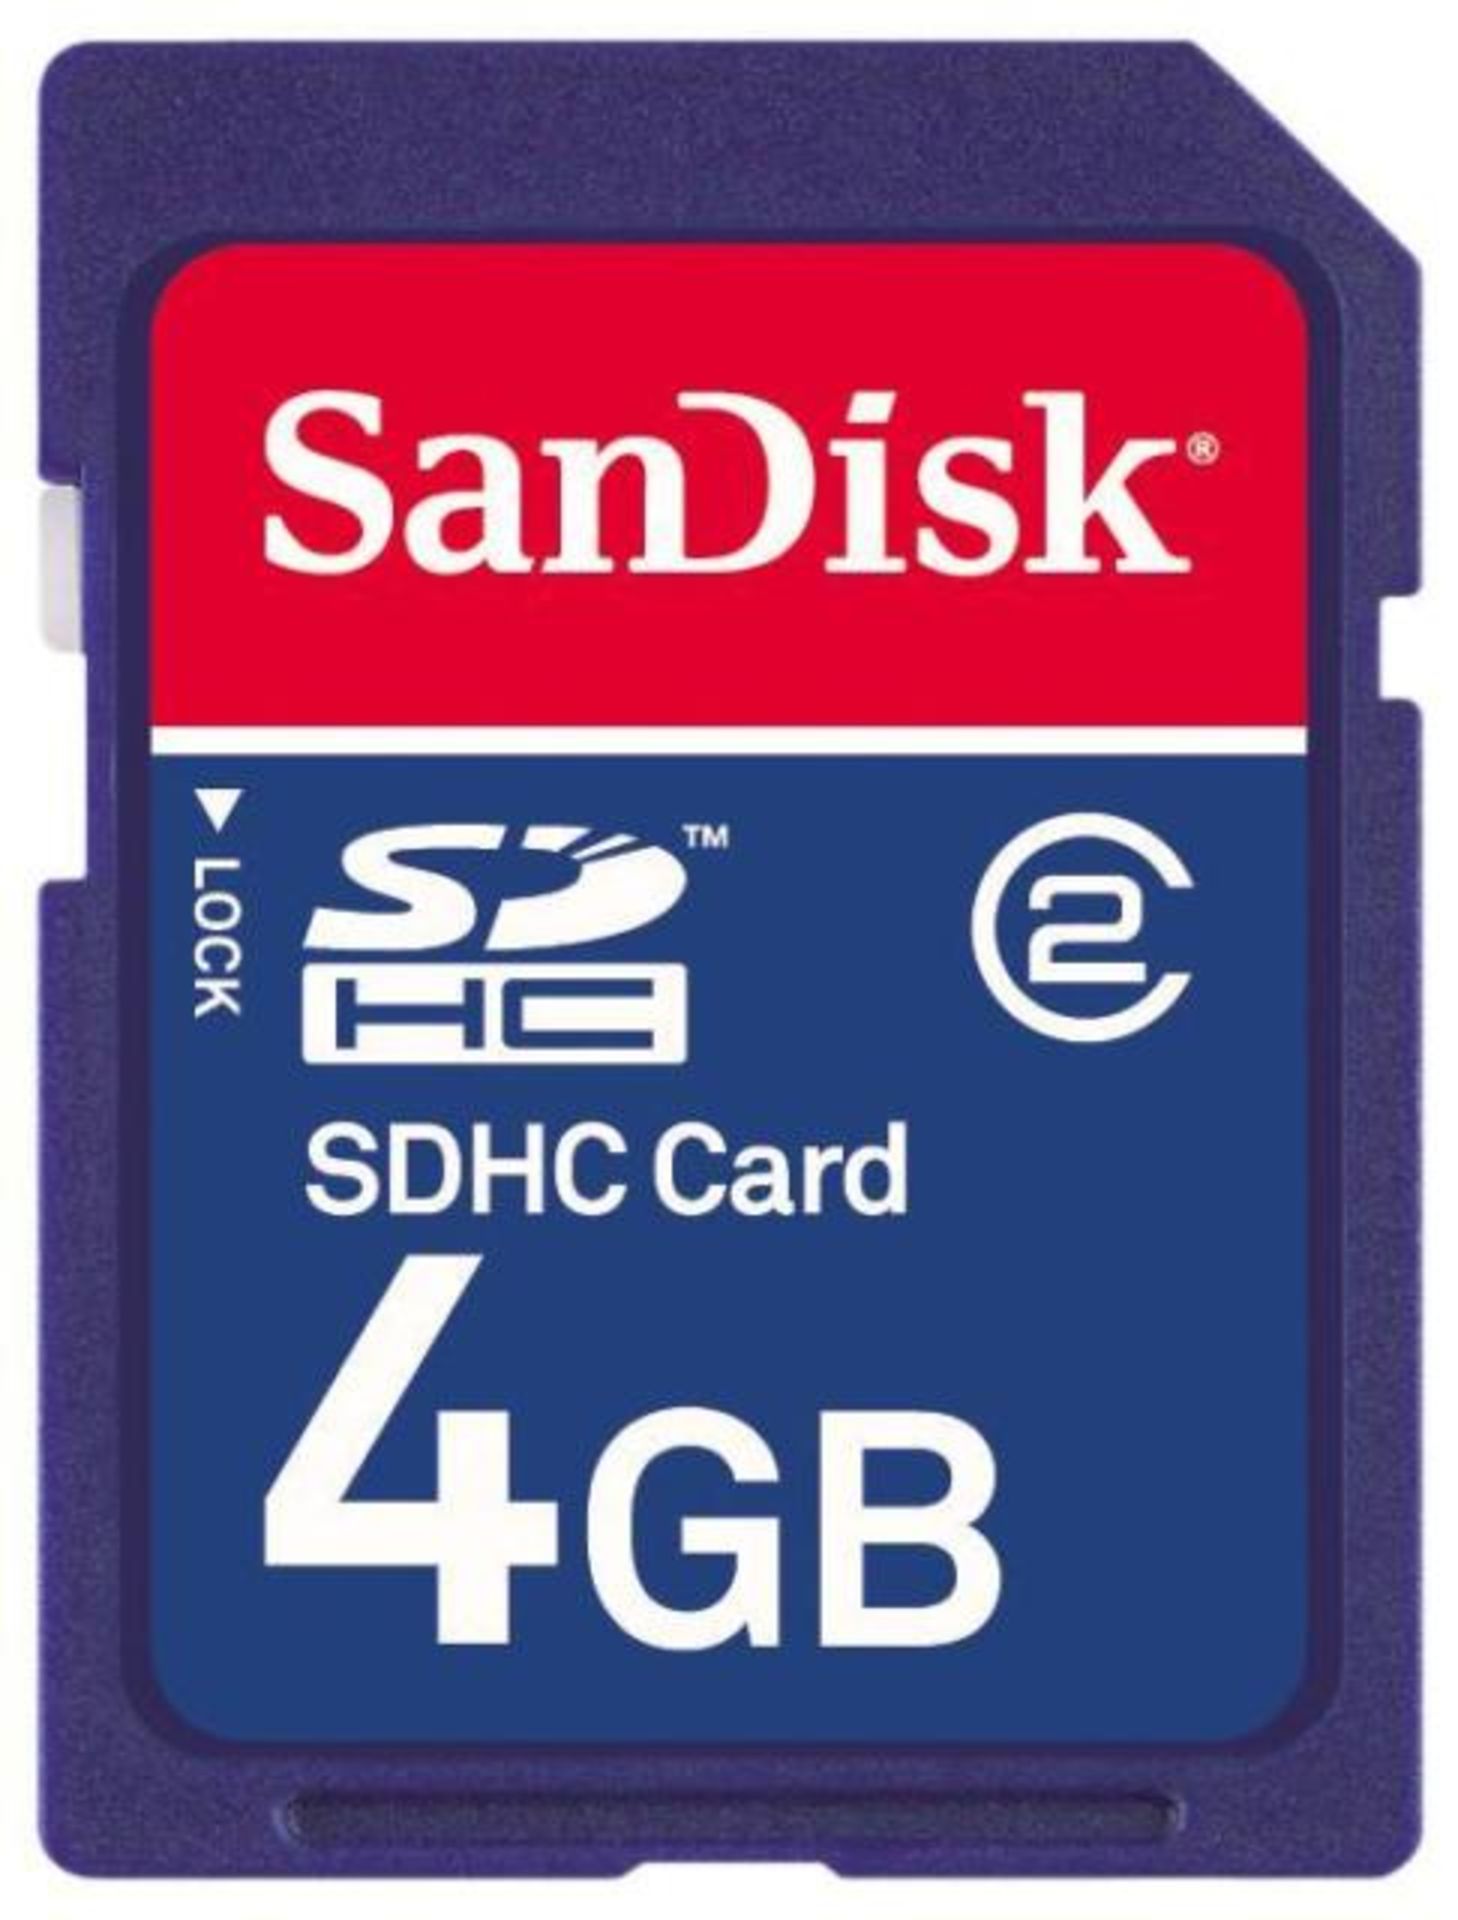 V Brand New A Lot Of Four SanDisk 4gb SDHC Cards ISP £8.30 Each (Venture Direct)